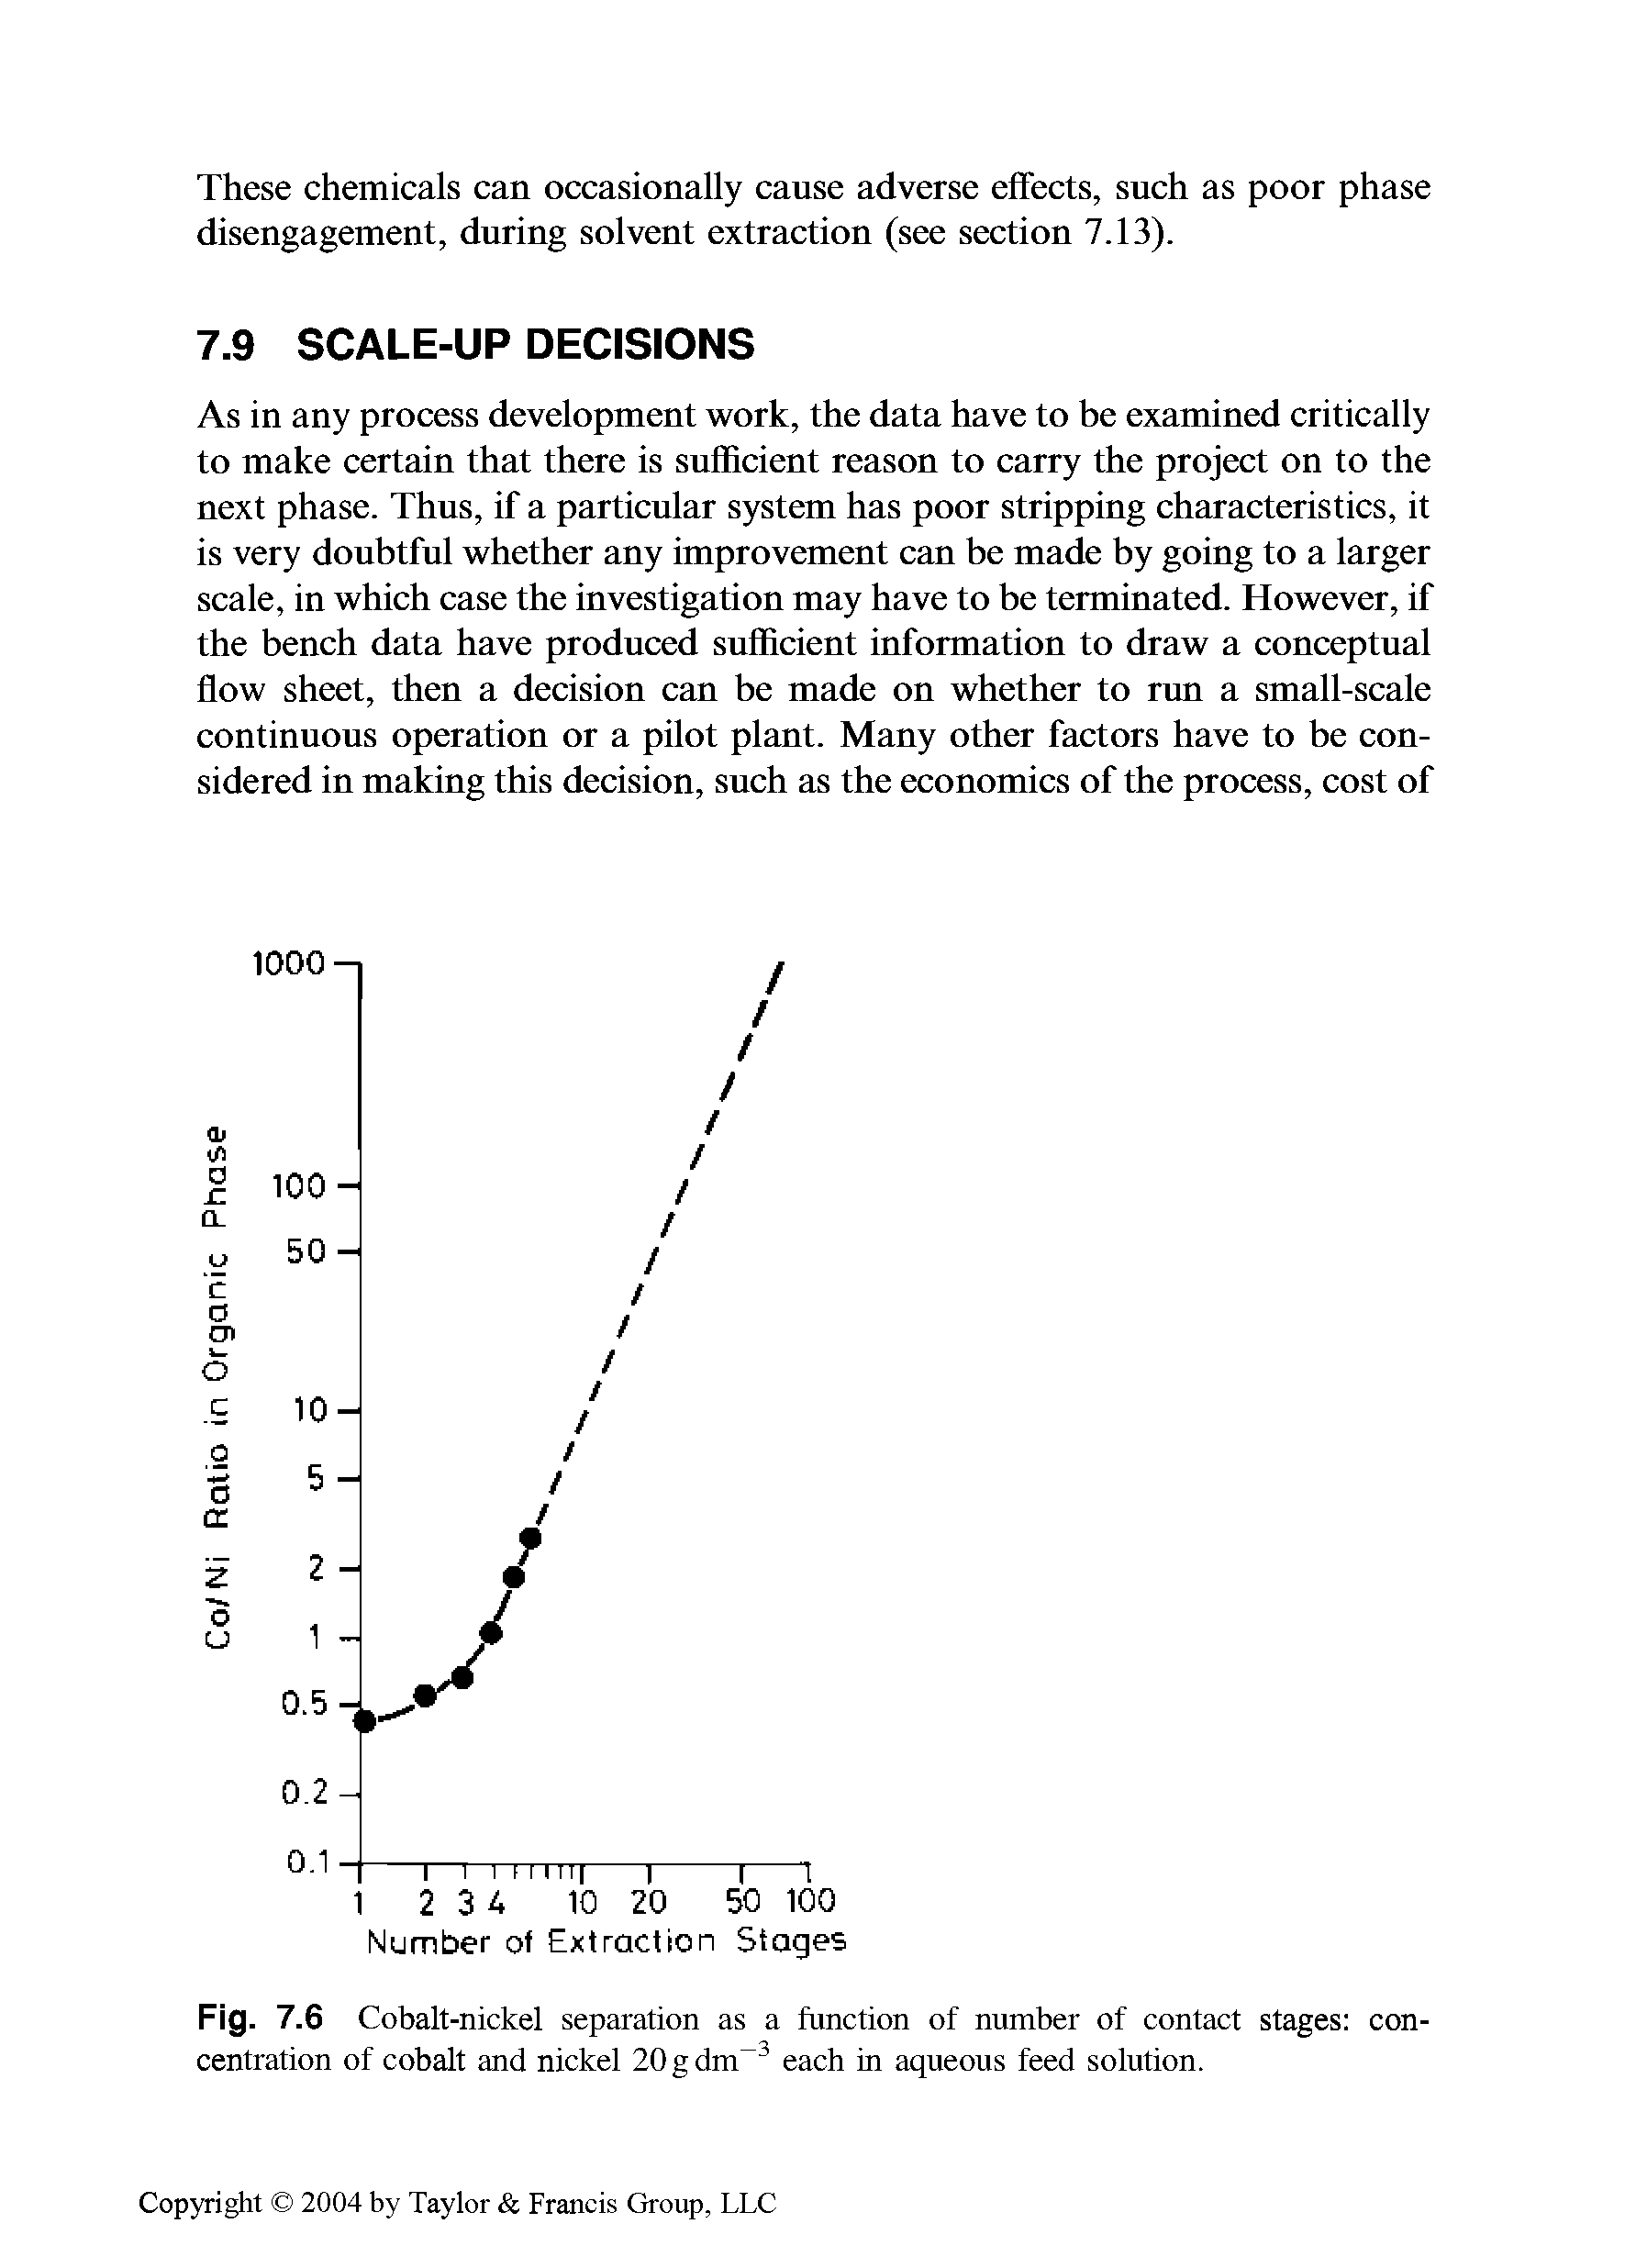 Fig. 7.6 Cobalt-nickel separation as a function of number of contact stages concentration of cobalt and nickel 20gdm each in aqueous feed solution.